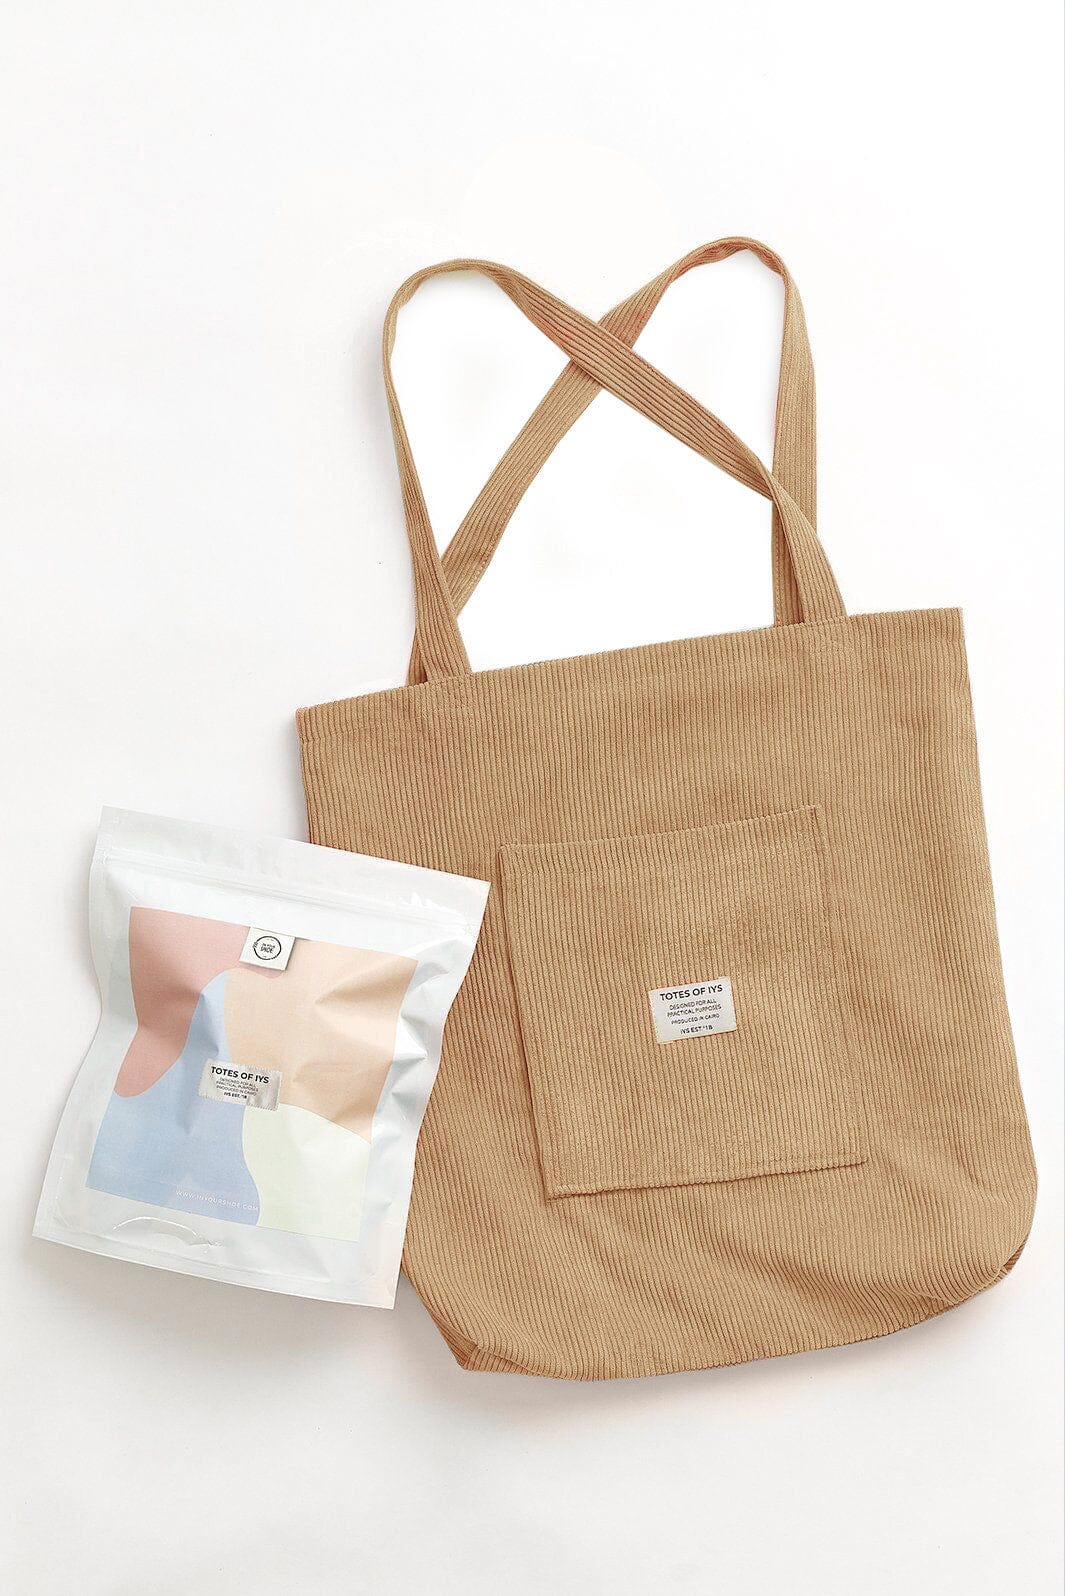 Camel Tote Totes IN YOUR SHOE 